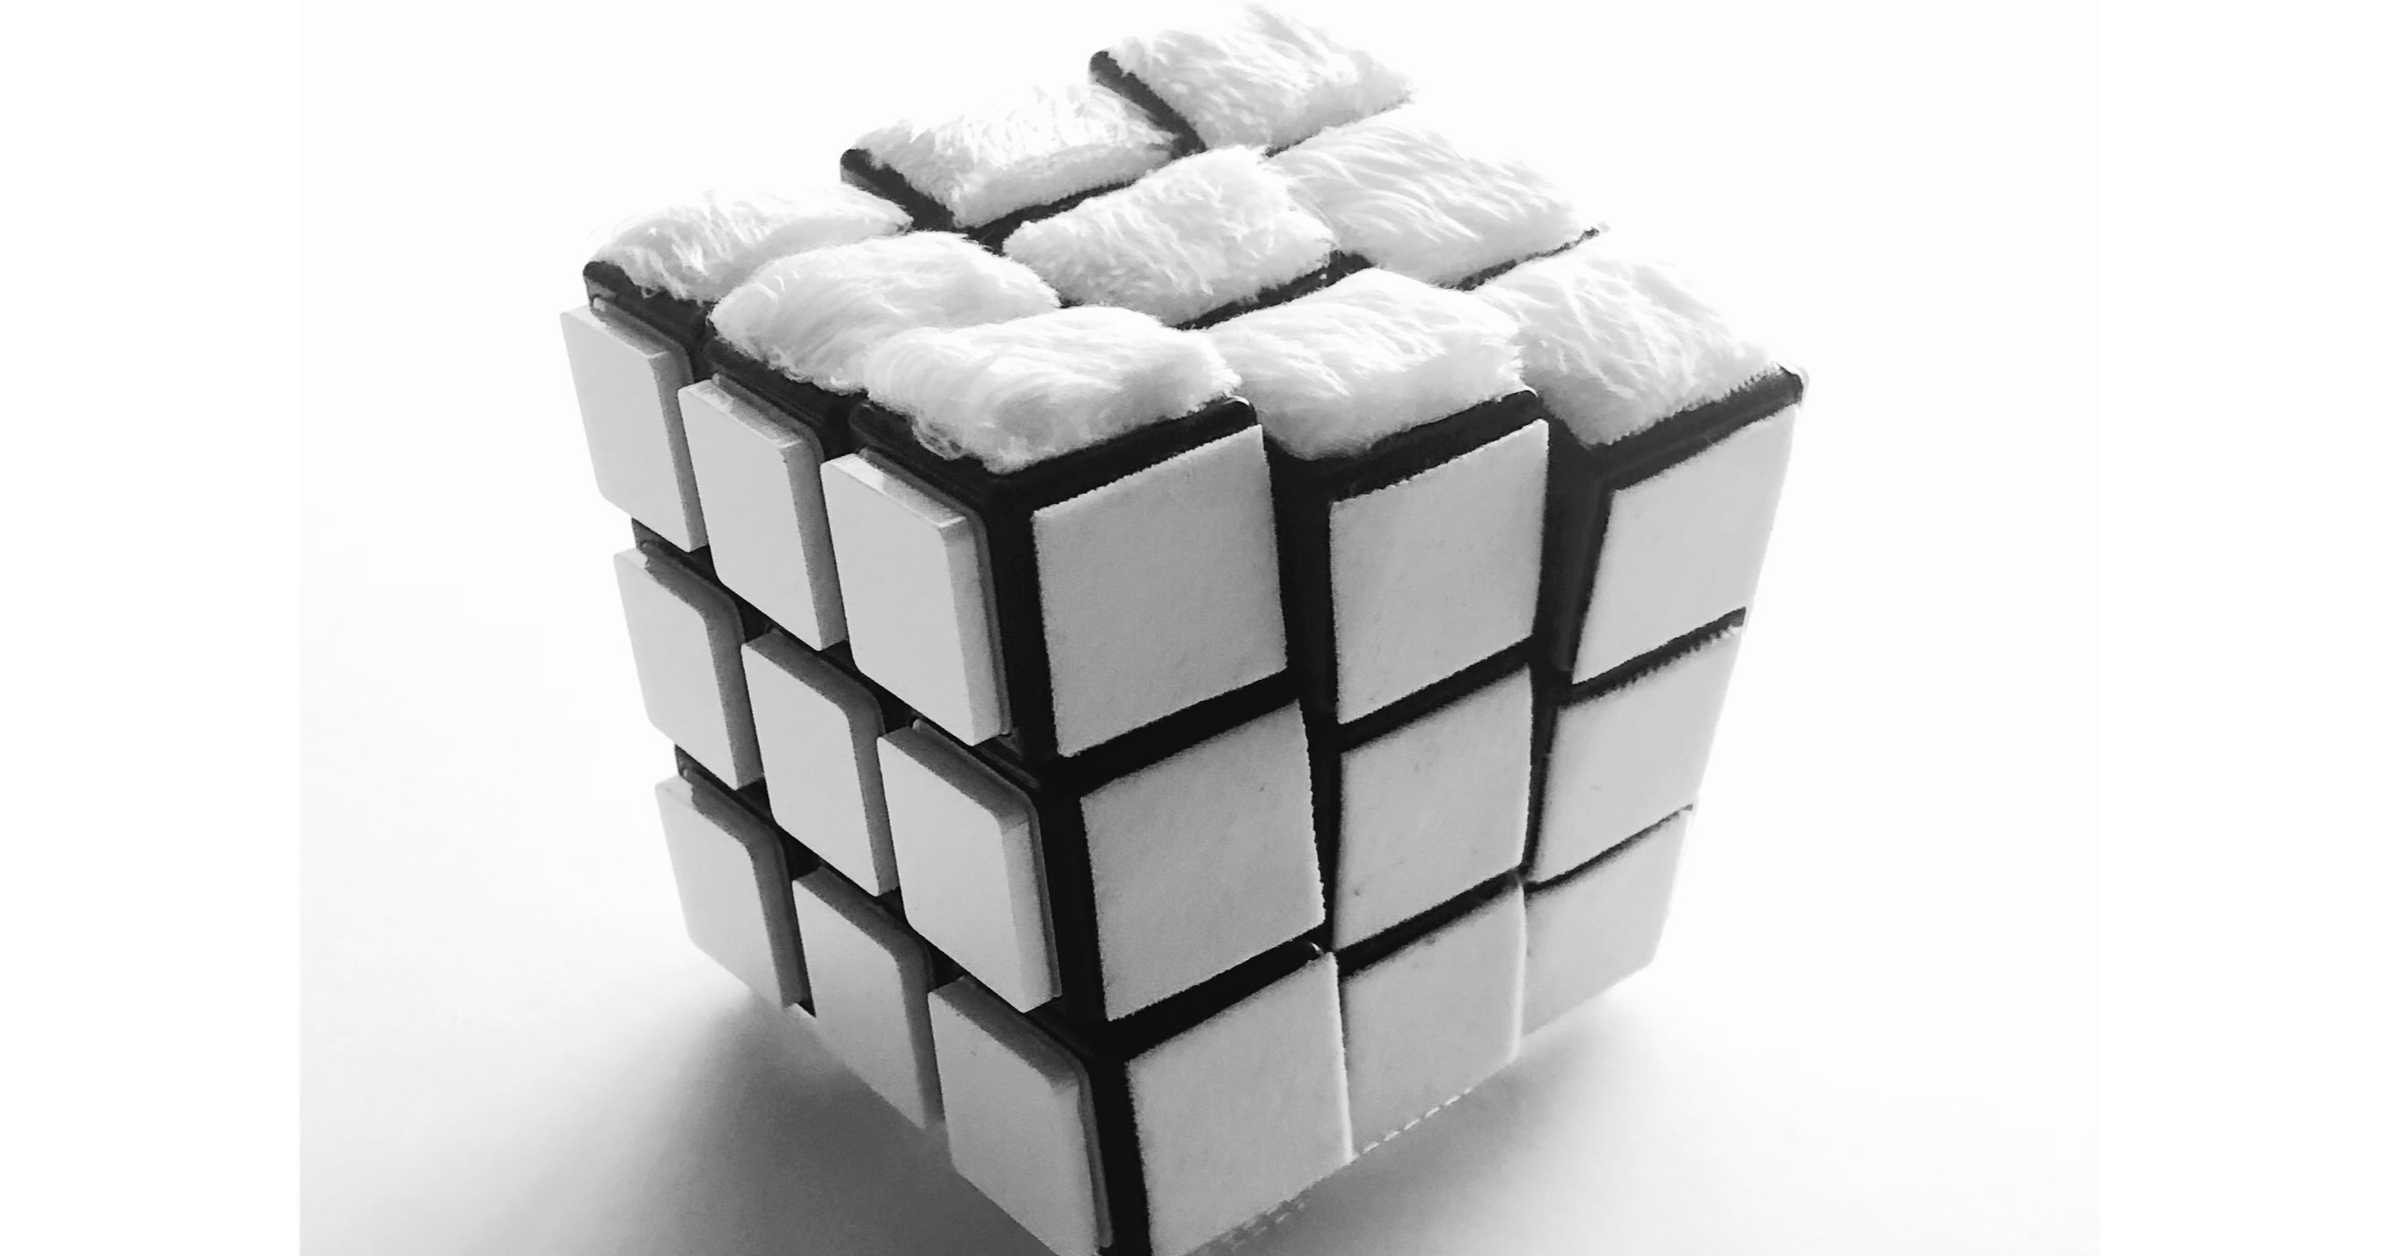 Product, Product design, Angle, Design, angle, White, Rubik's cube, Toy, Mechanical puzzle, Puzzle, Rectangle, Square